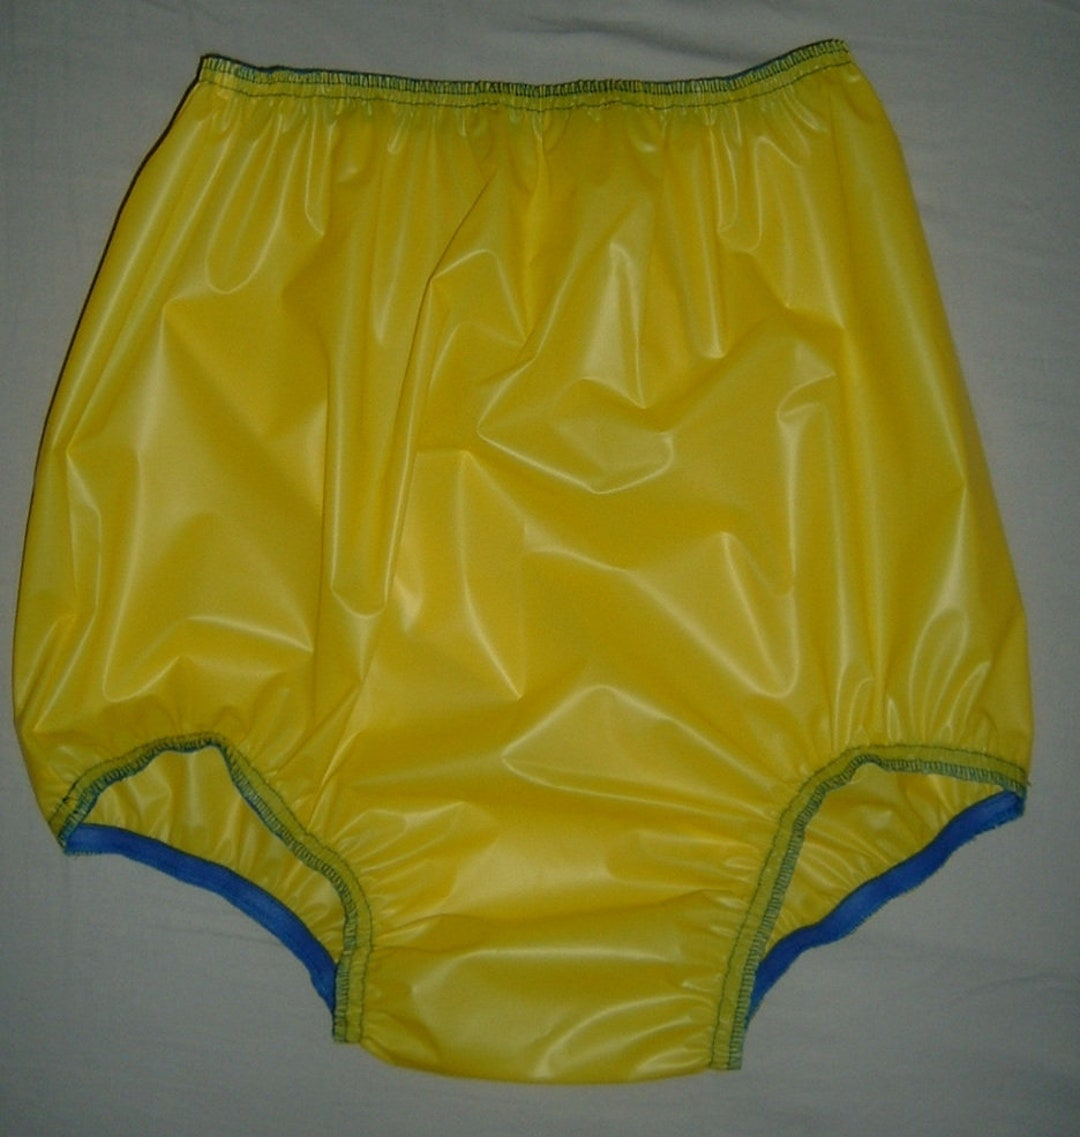 Pvcbreast High Pants bright Yellow Semi Transparent new Very - Etsy